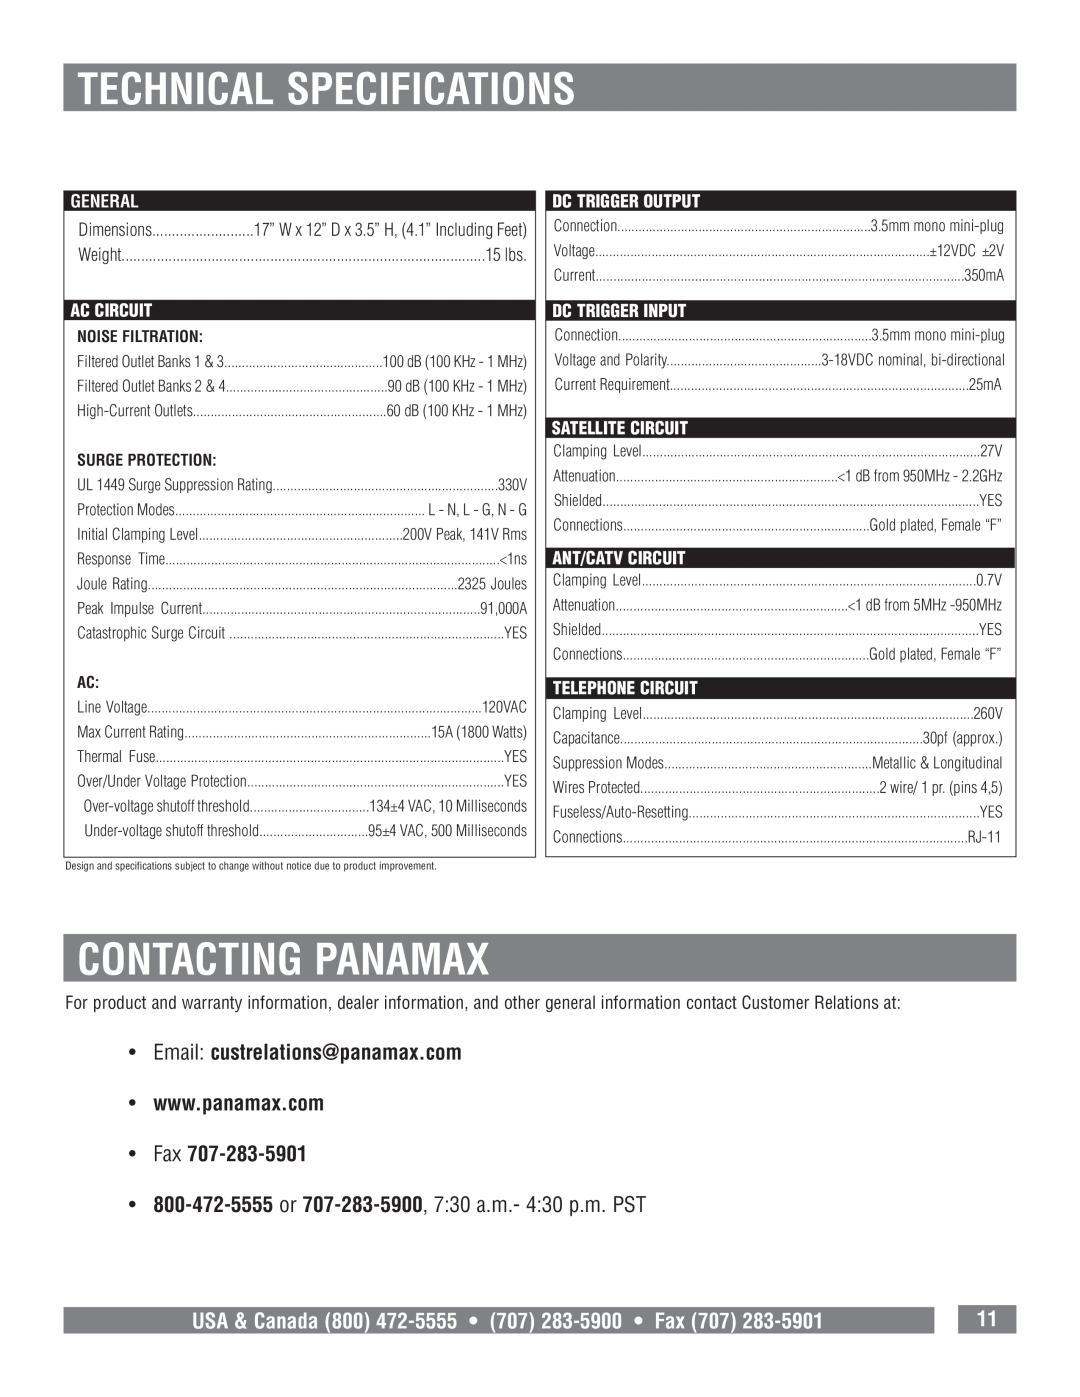 Panamax MAX 5410 Technical Specifications, Contacting Panamax, Email custrelations@panamax.com, General, Ac Circuit 